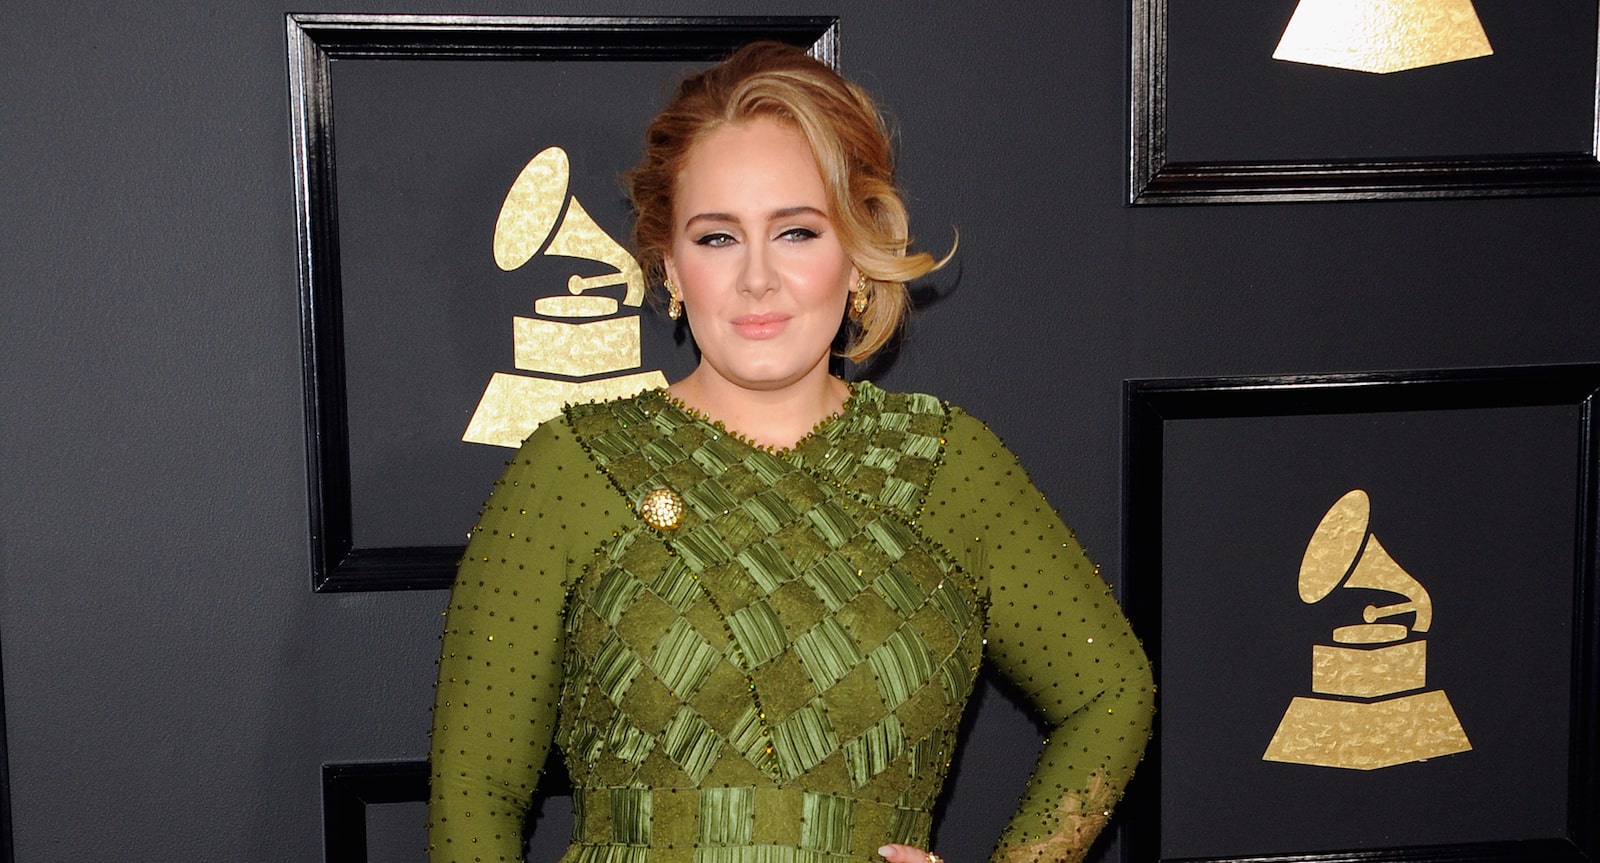 Discover the cosmetic surgery related to Adele's weight loss